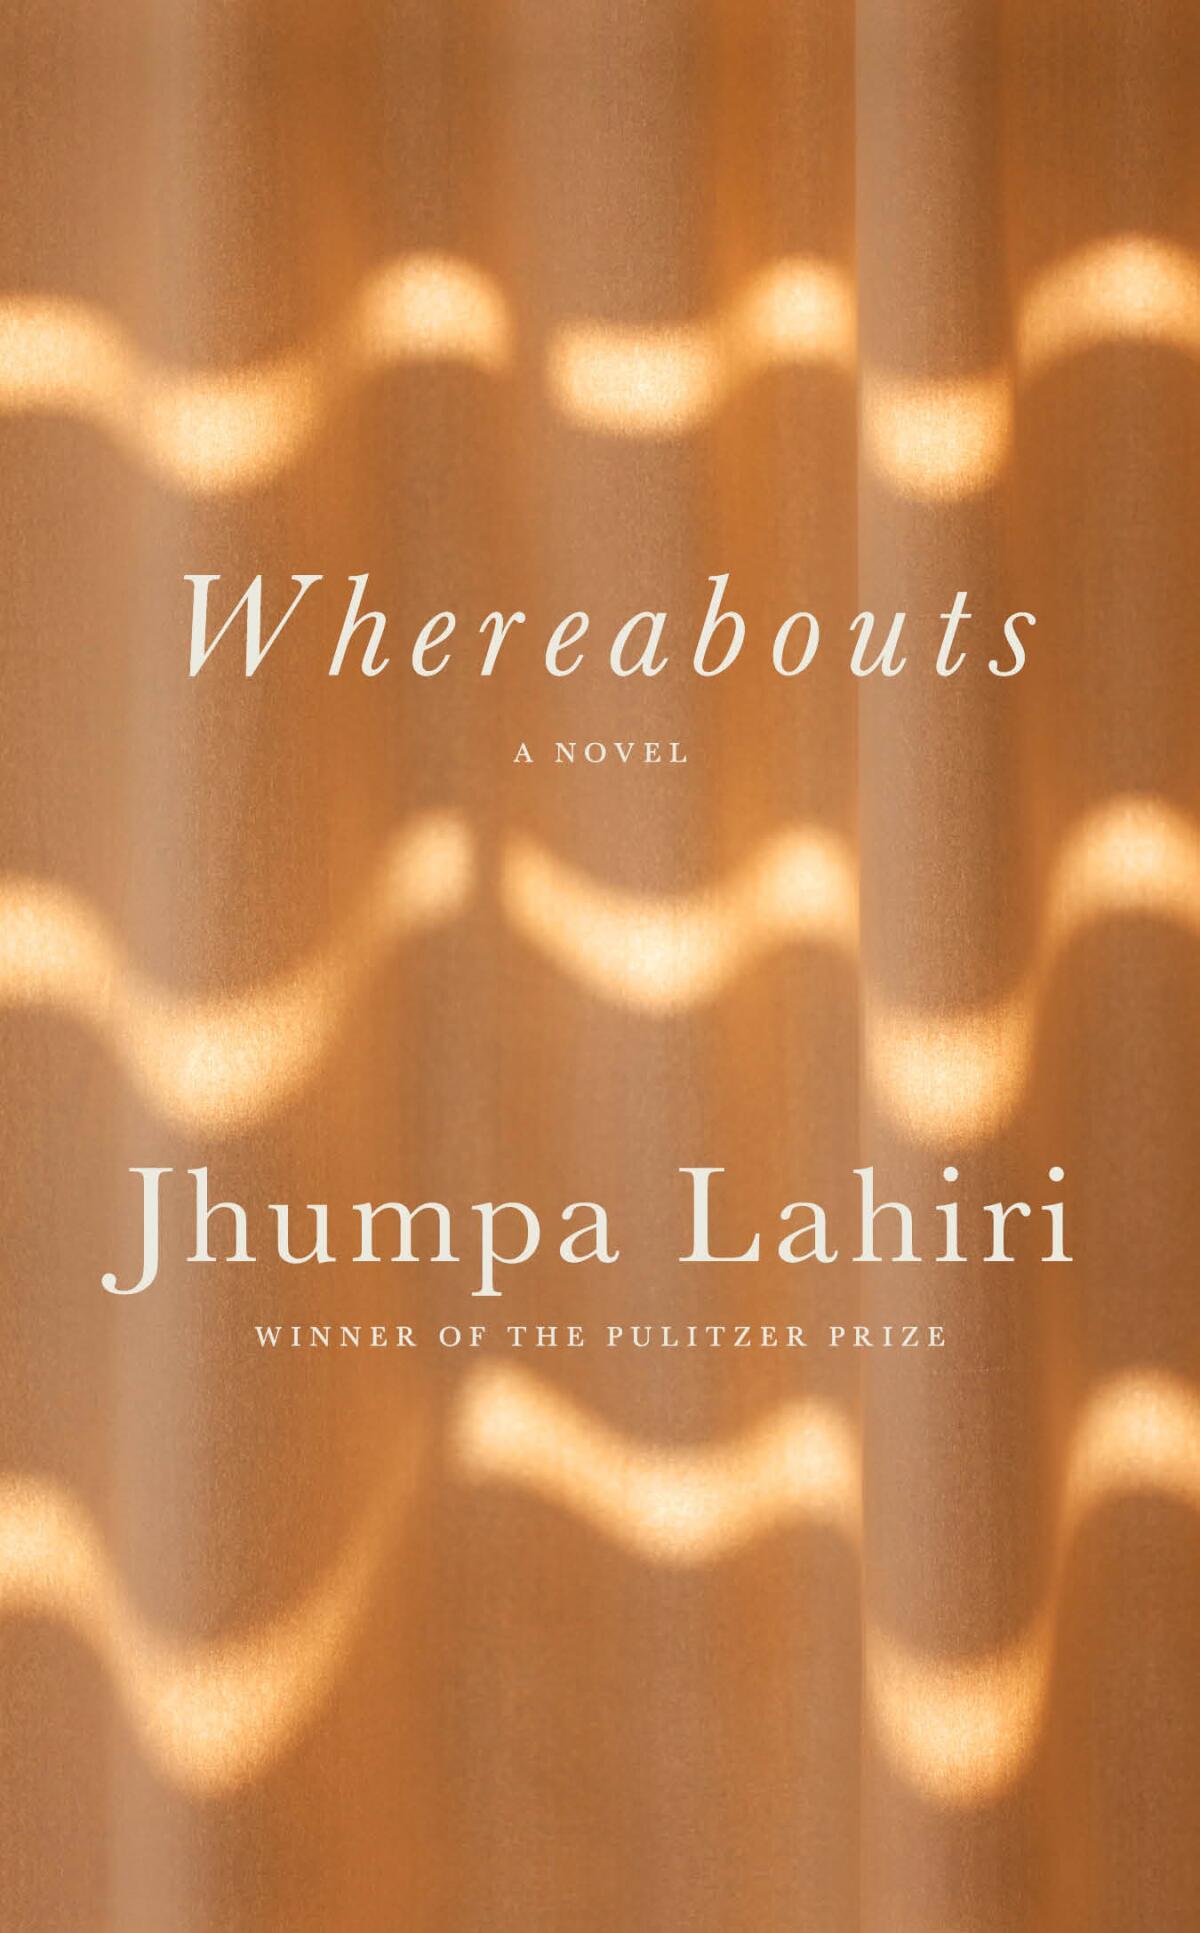 The book cover for "Whereabouts" shows undulating bands of light